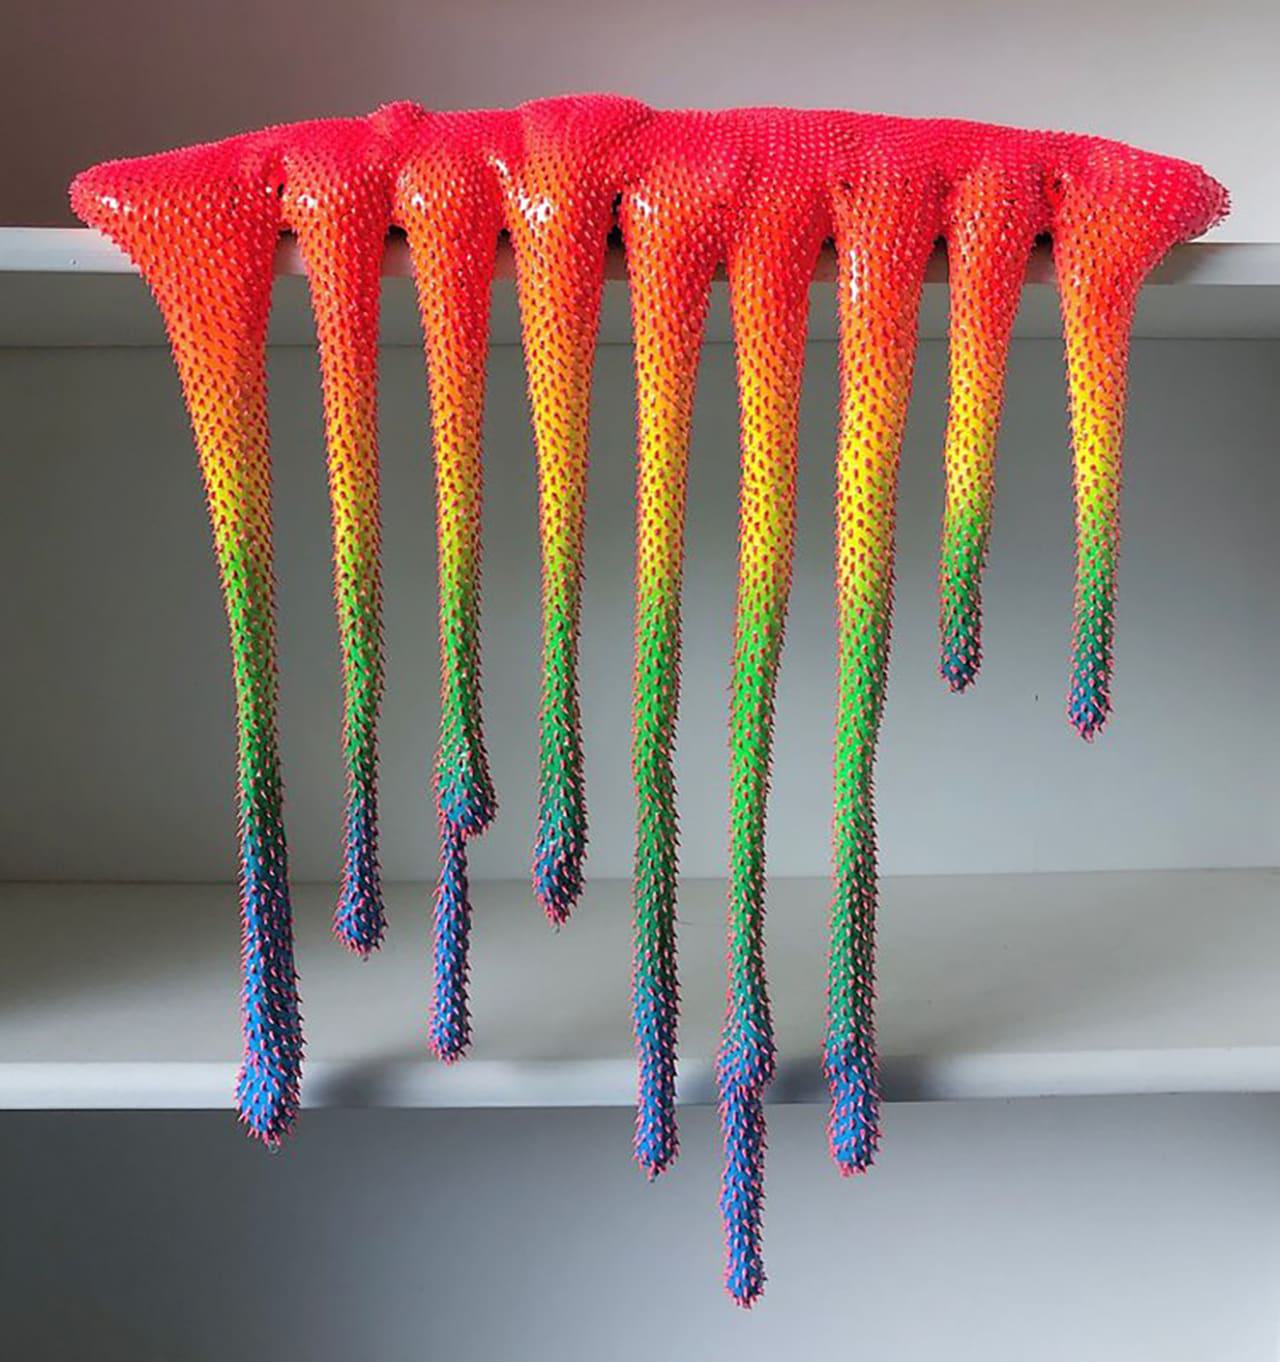 Image of Innovative Sculptures by Dan Lam